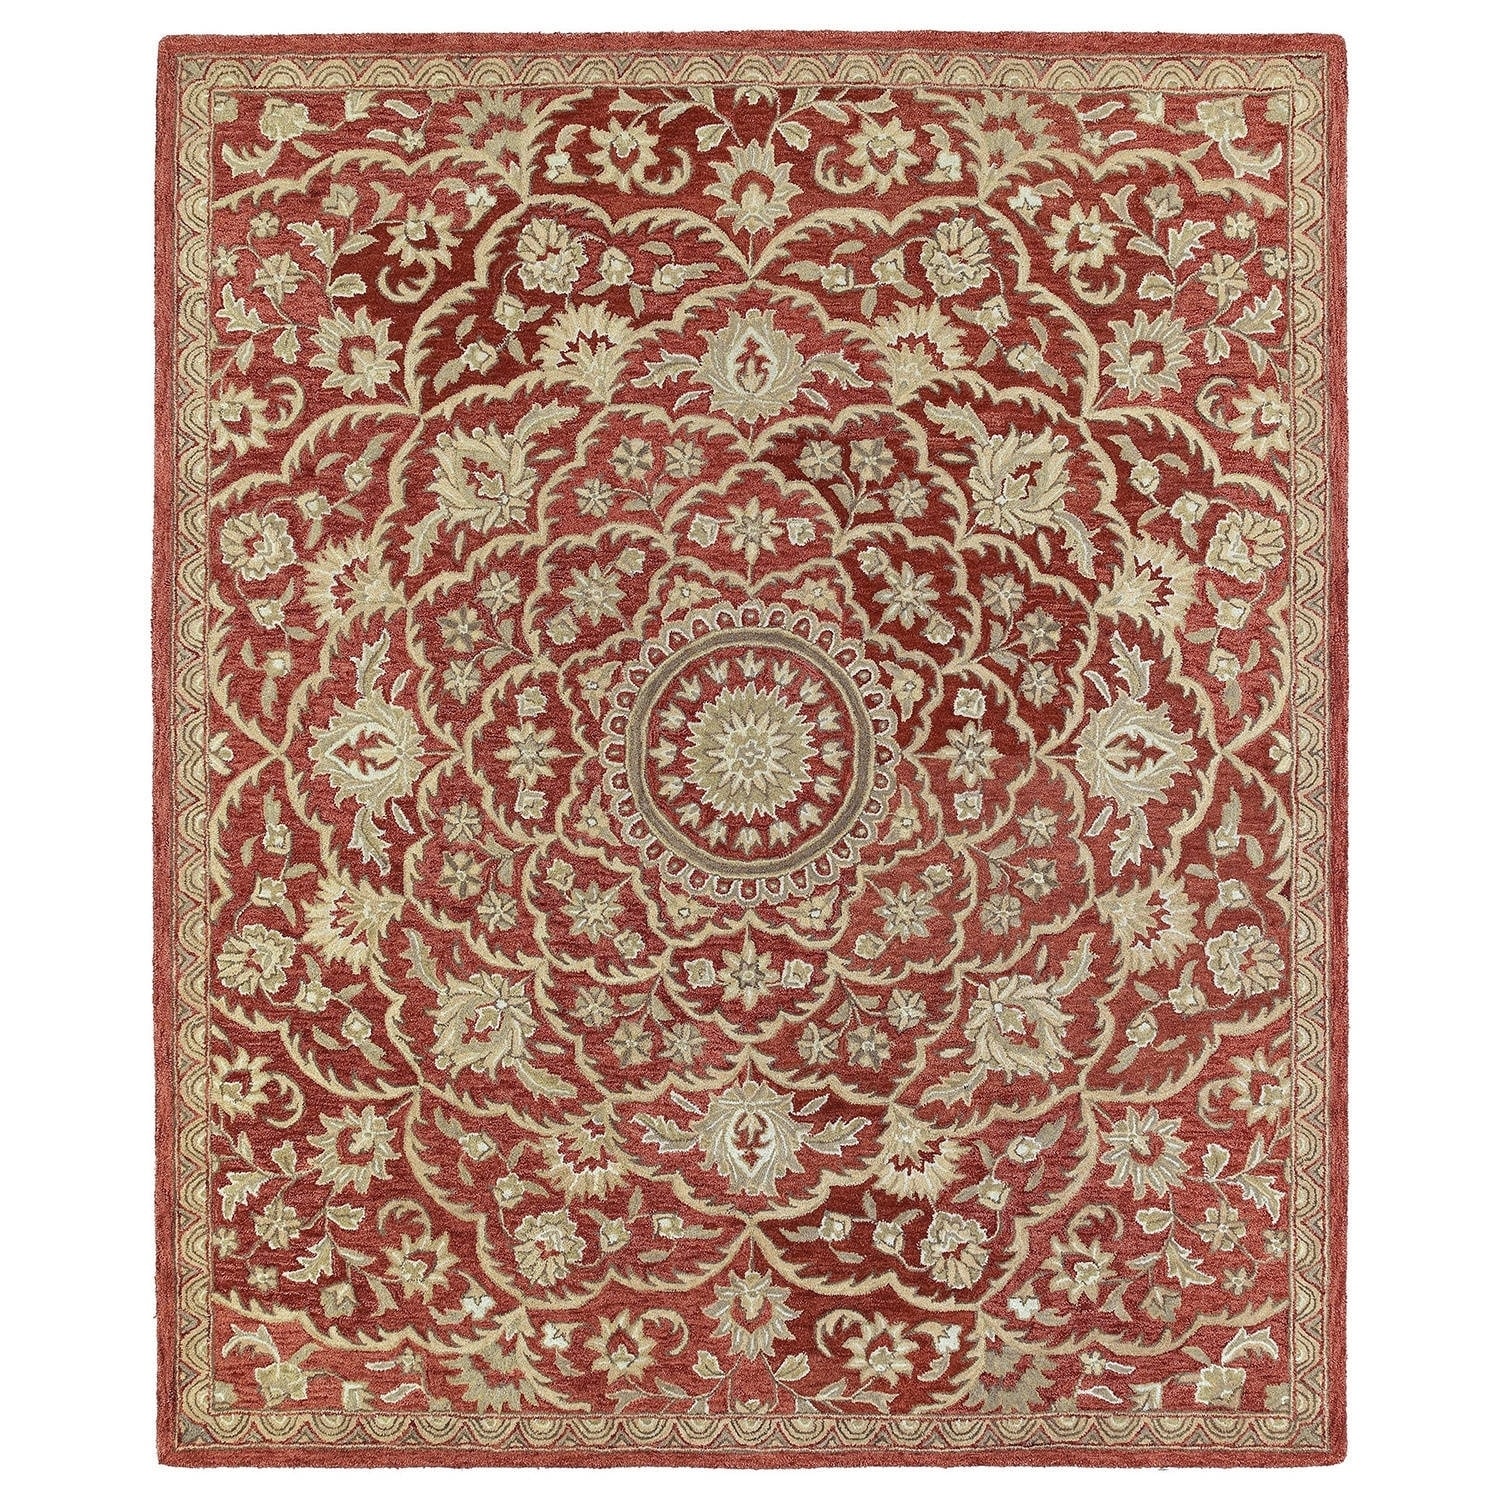 Hand tufted Joaquin Red Medallion Wool Rug (2 X 3)